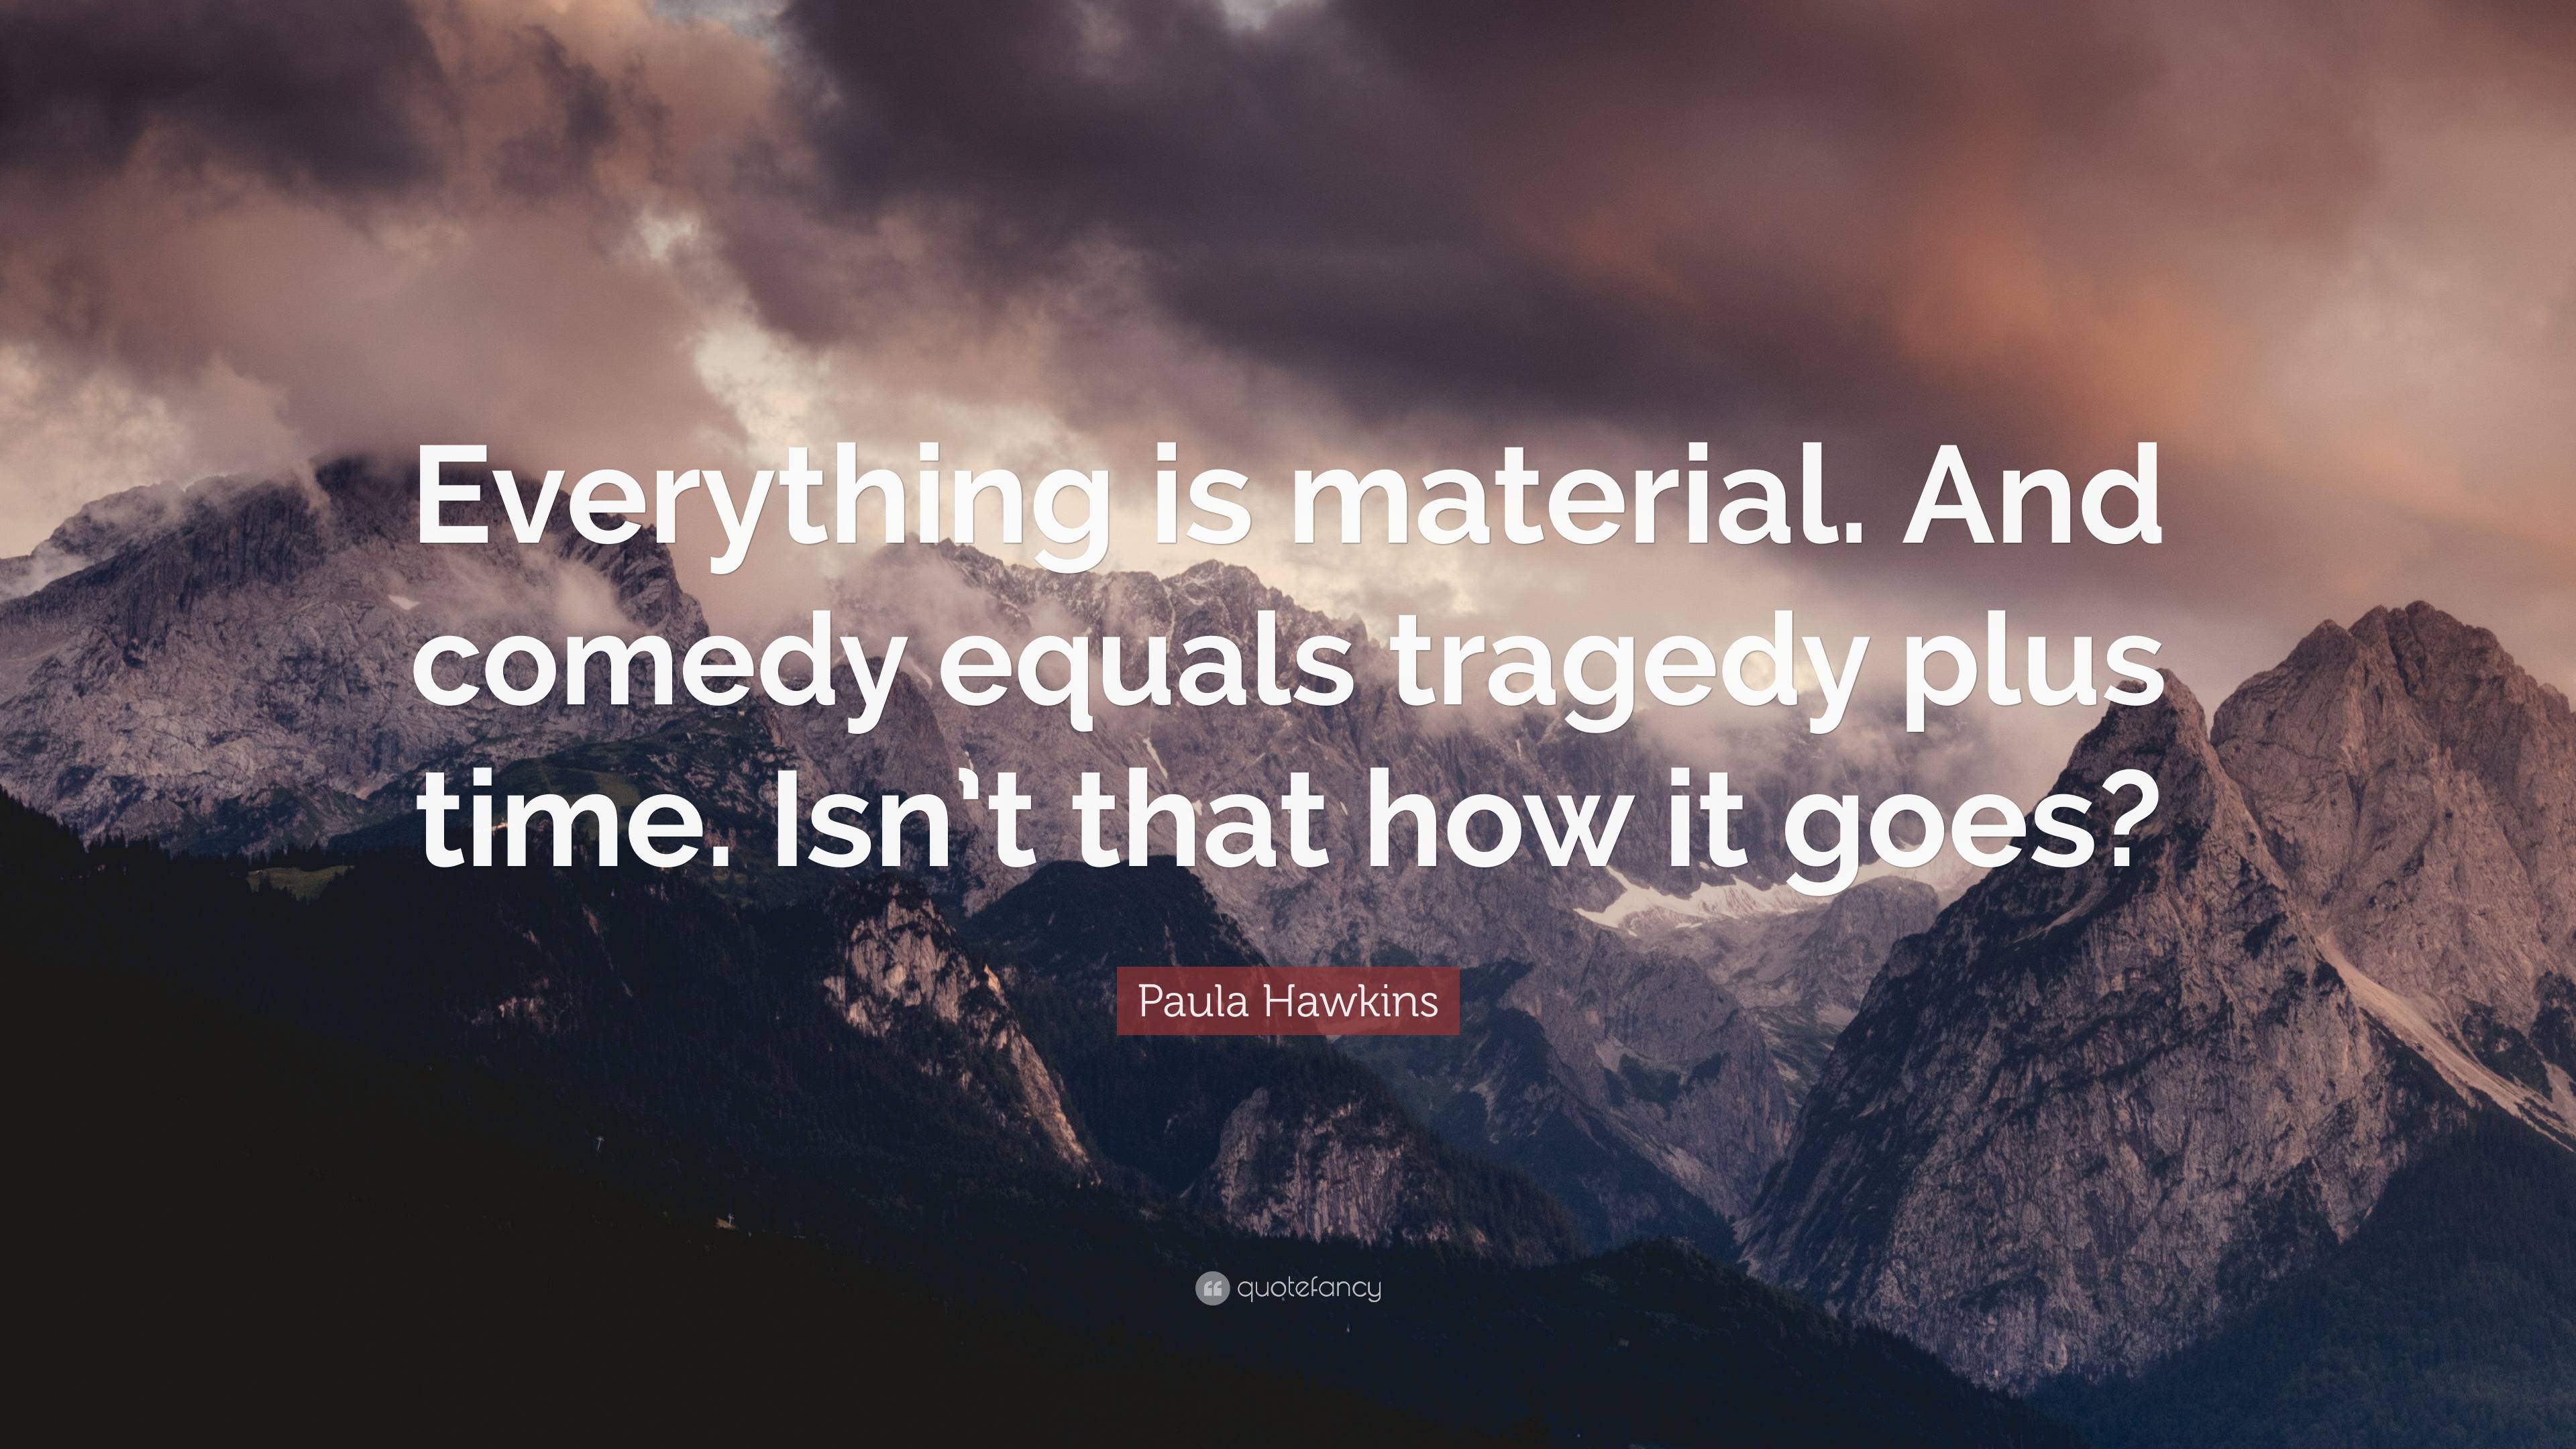 https://quotefancy.com/media/wallpaper/3840x2160/7255650-Paula-Hawkins-Quote-Everything-is-material-And-comedy-equals.jpg